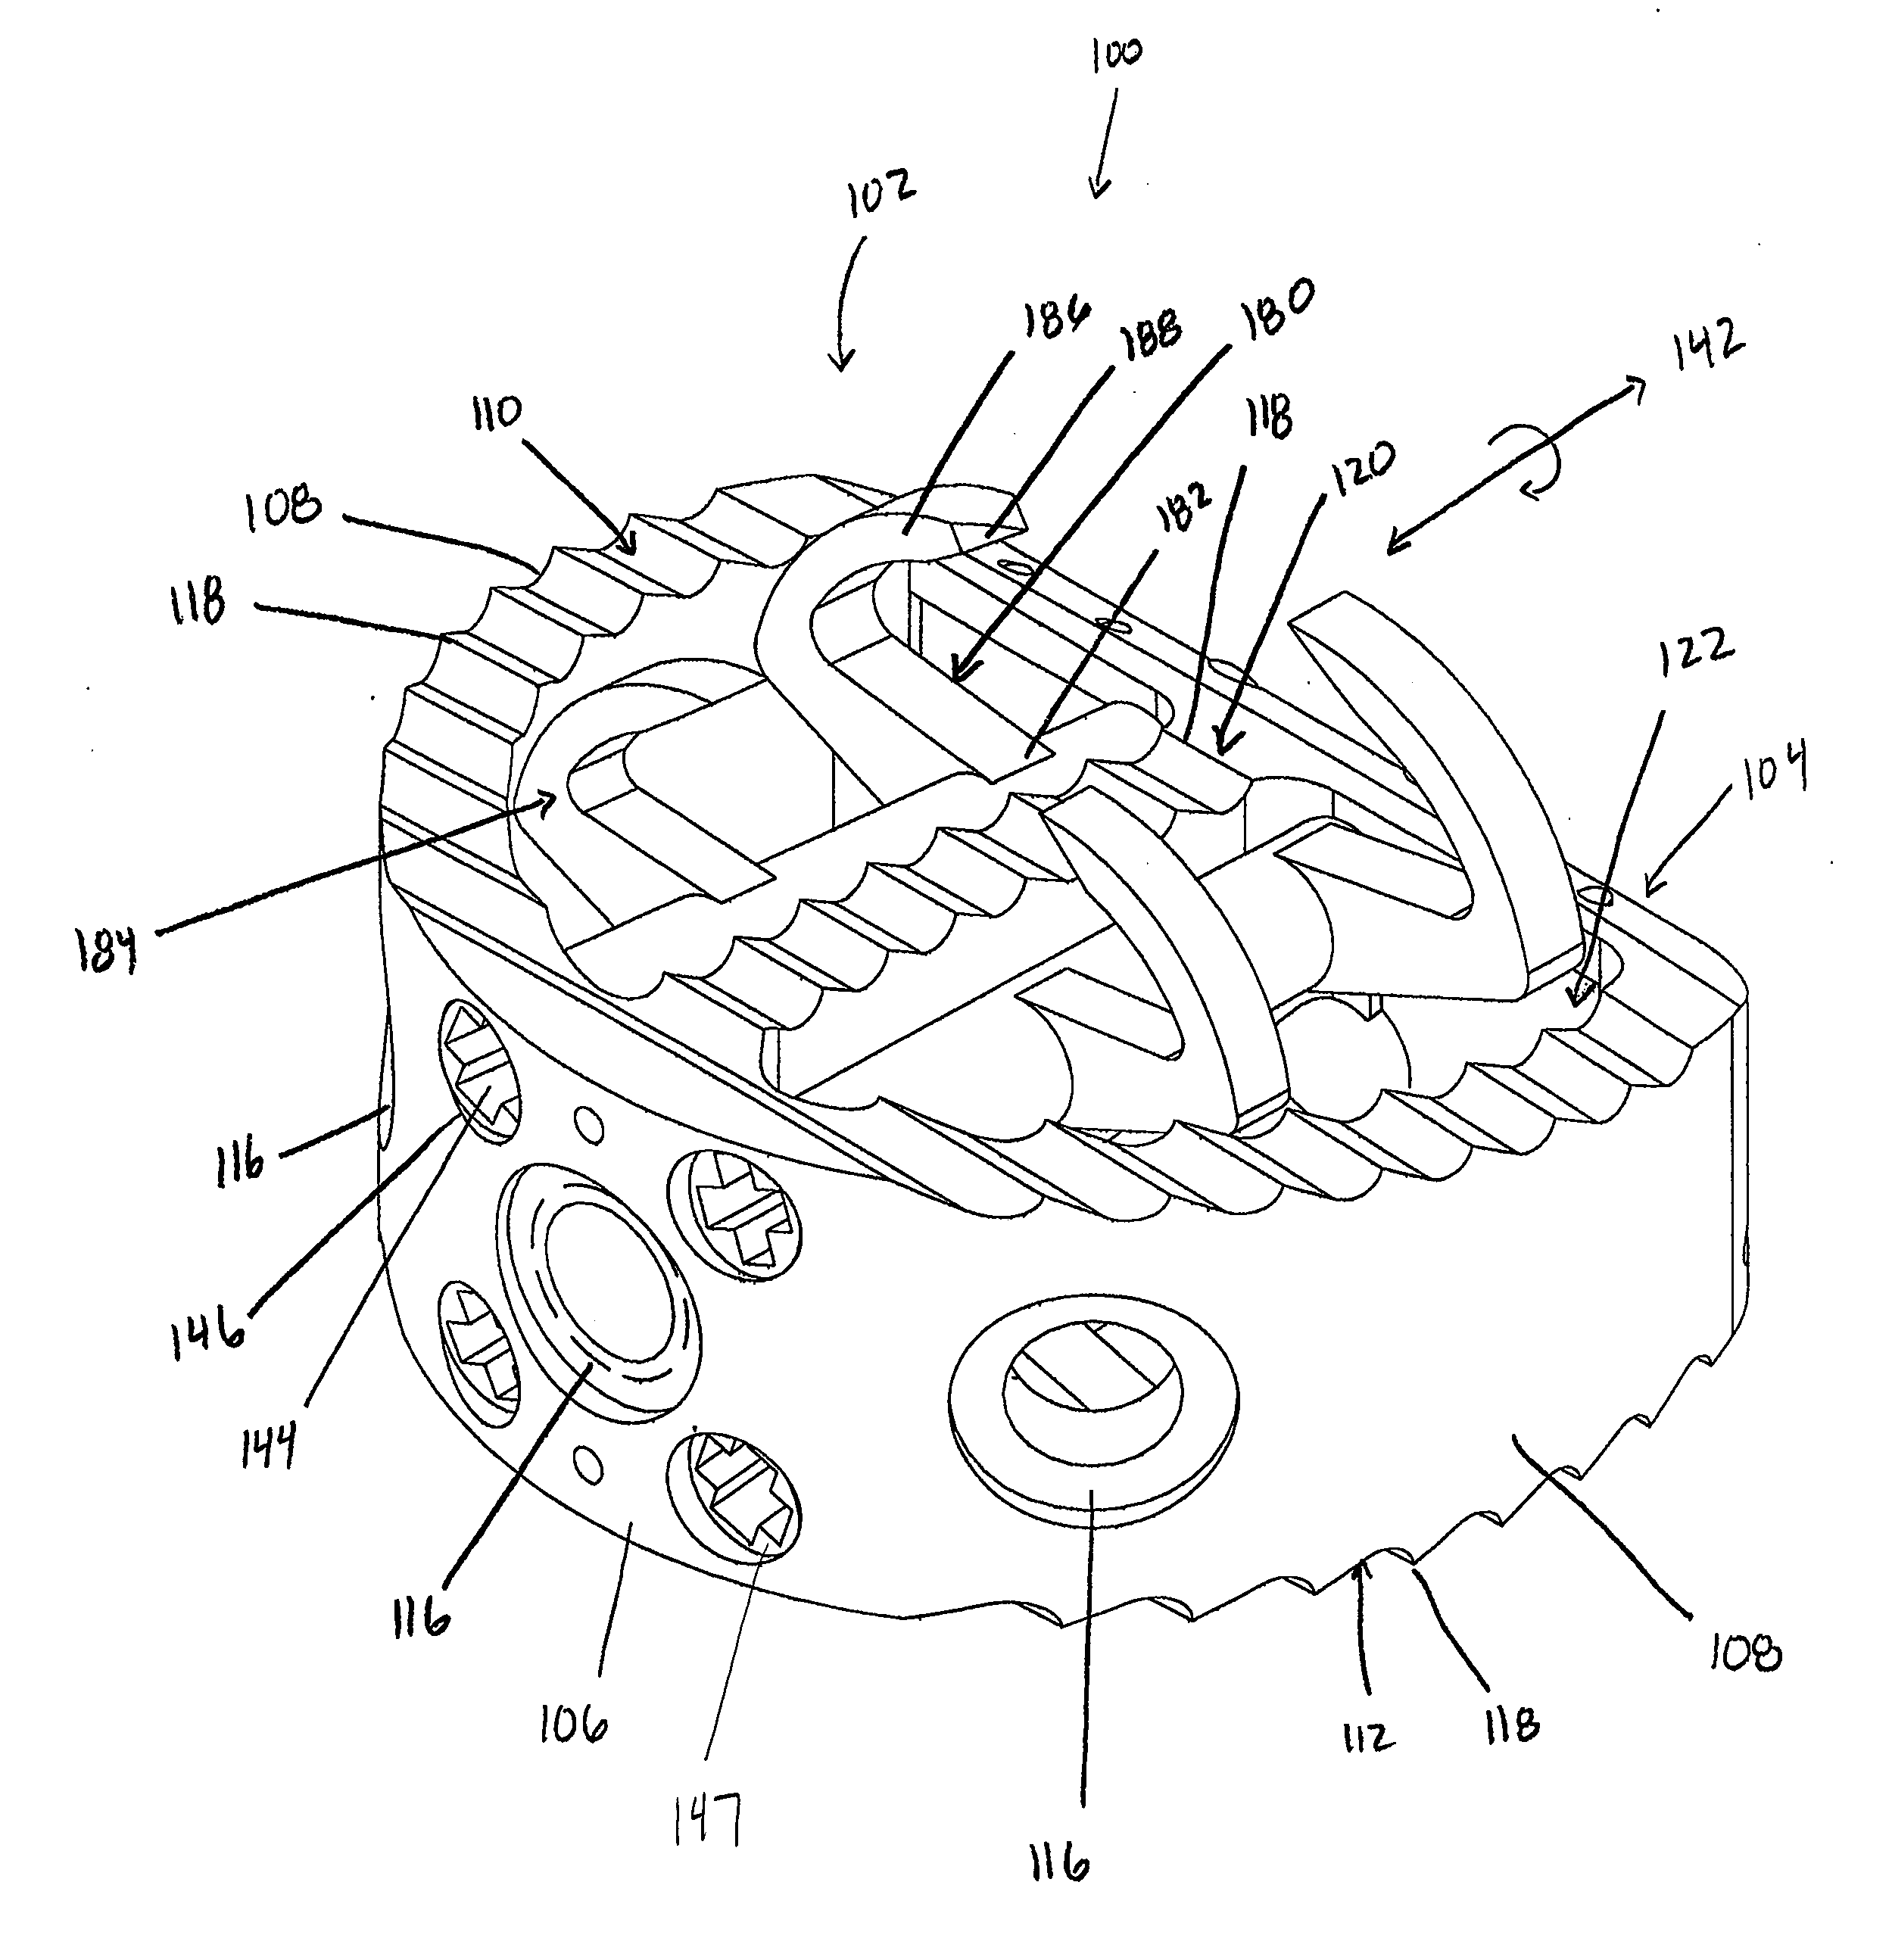 Device for Securing an Implant to Tissue